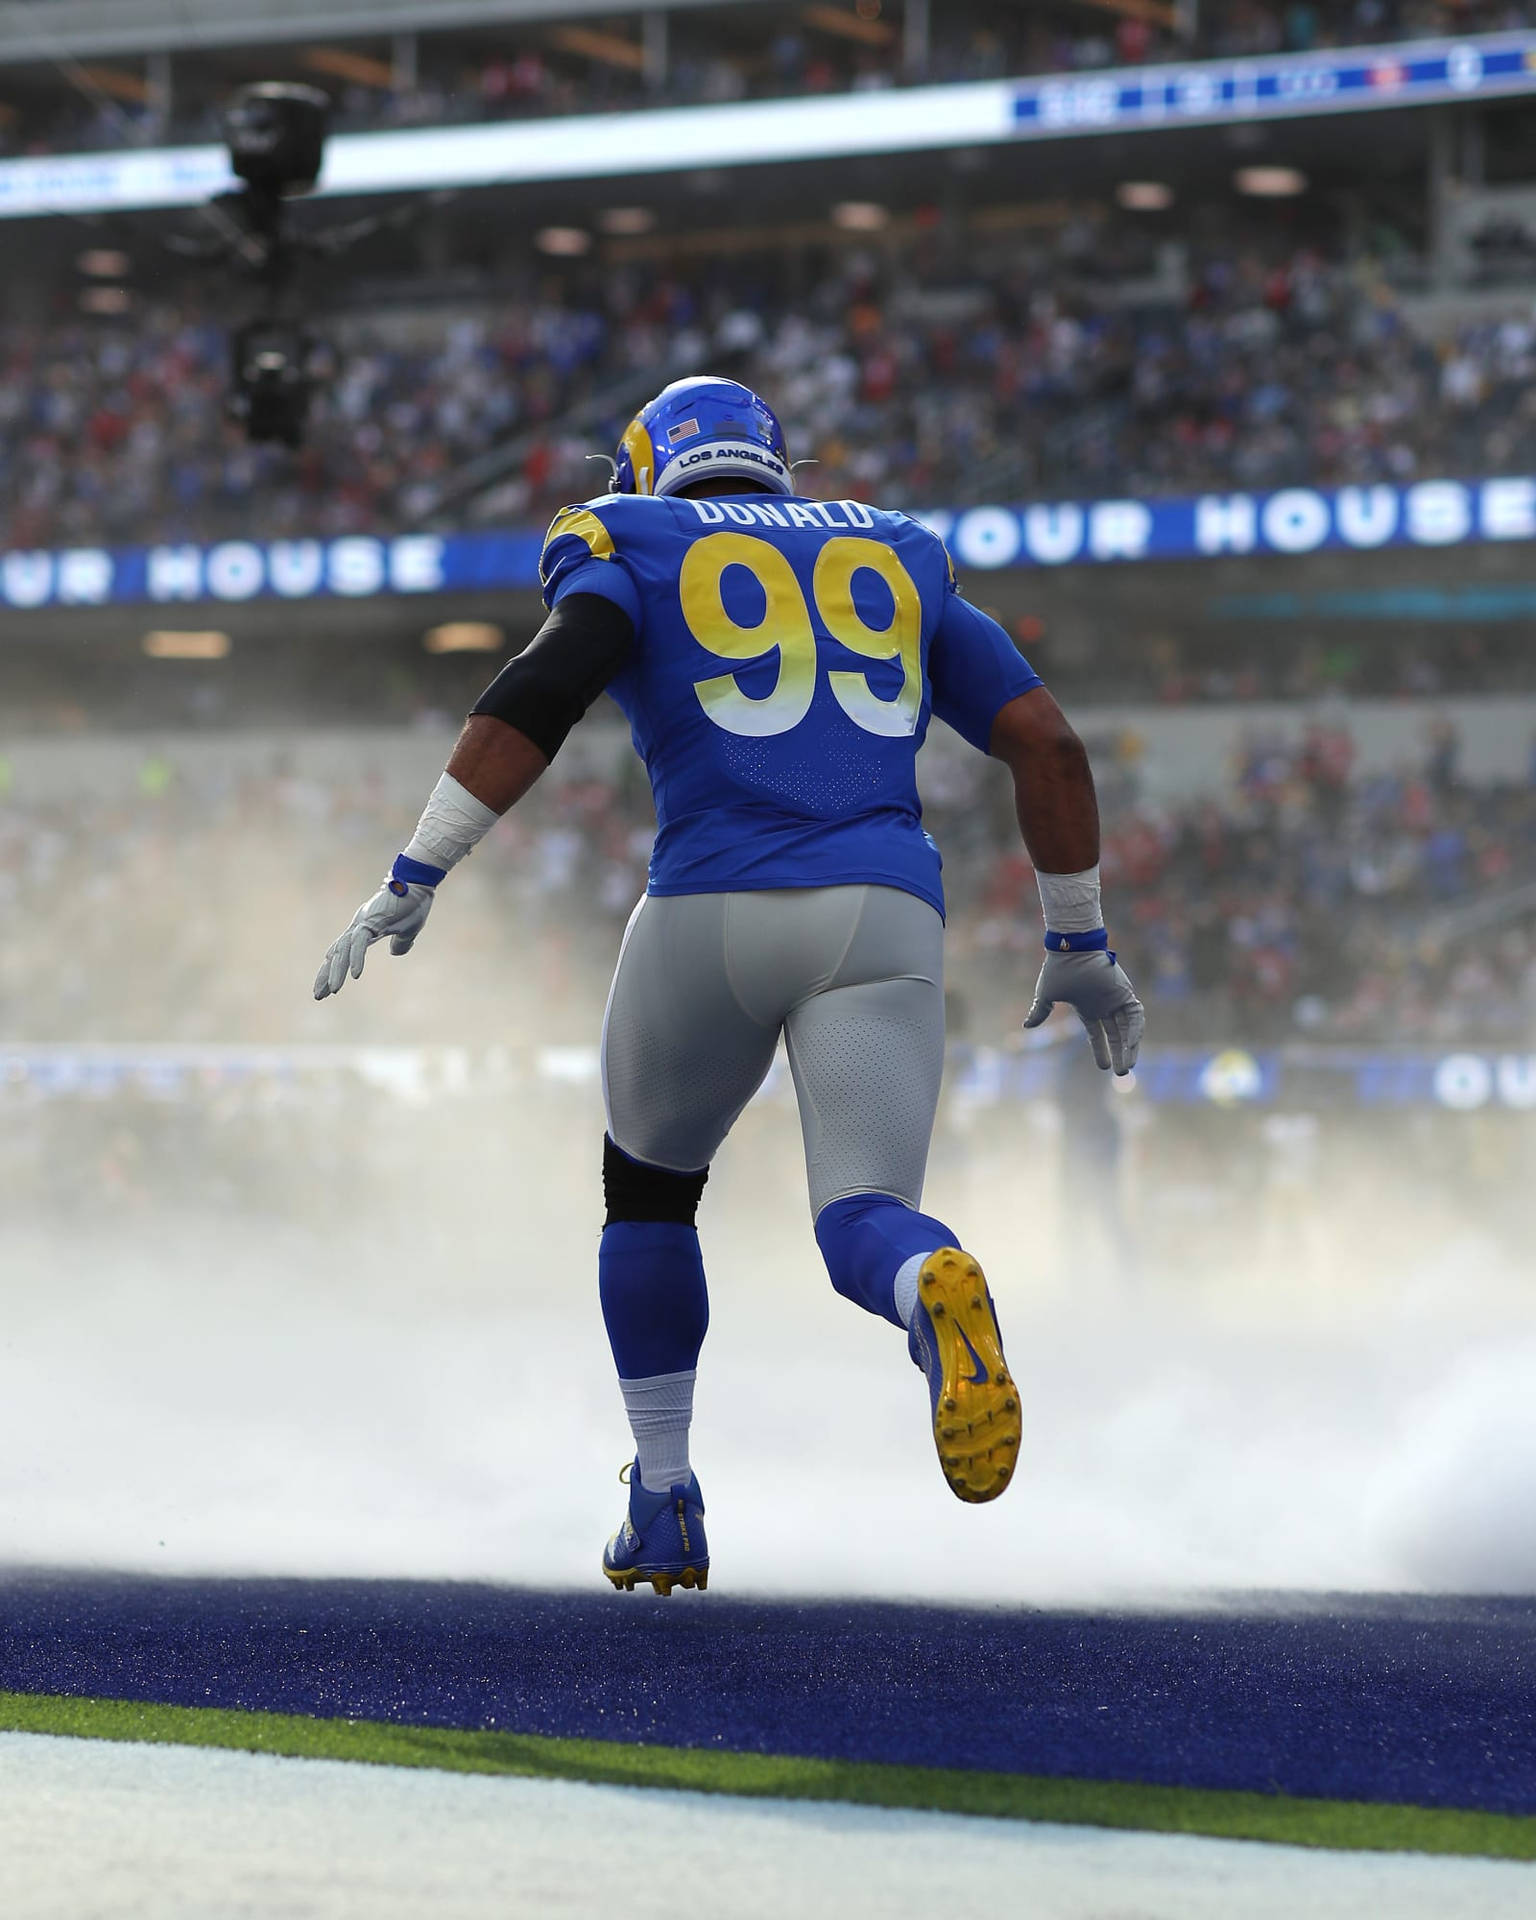 Nfl Los Angeles Rams Aaron Donald Football Match Background